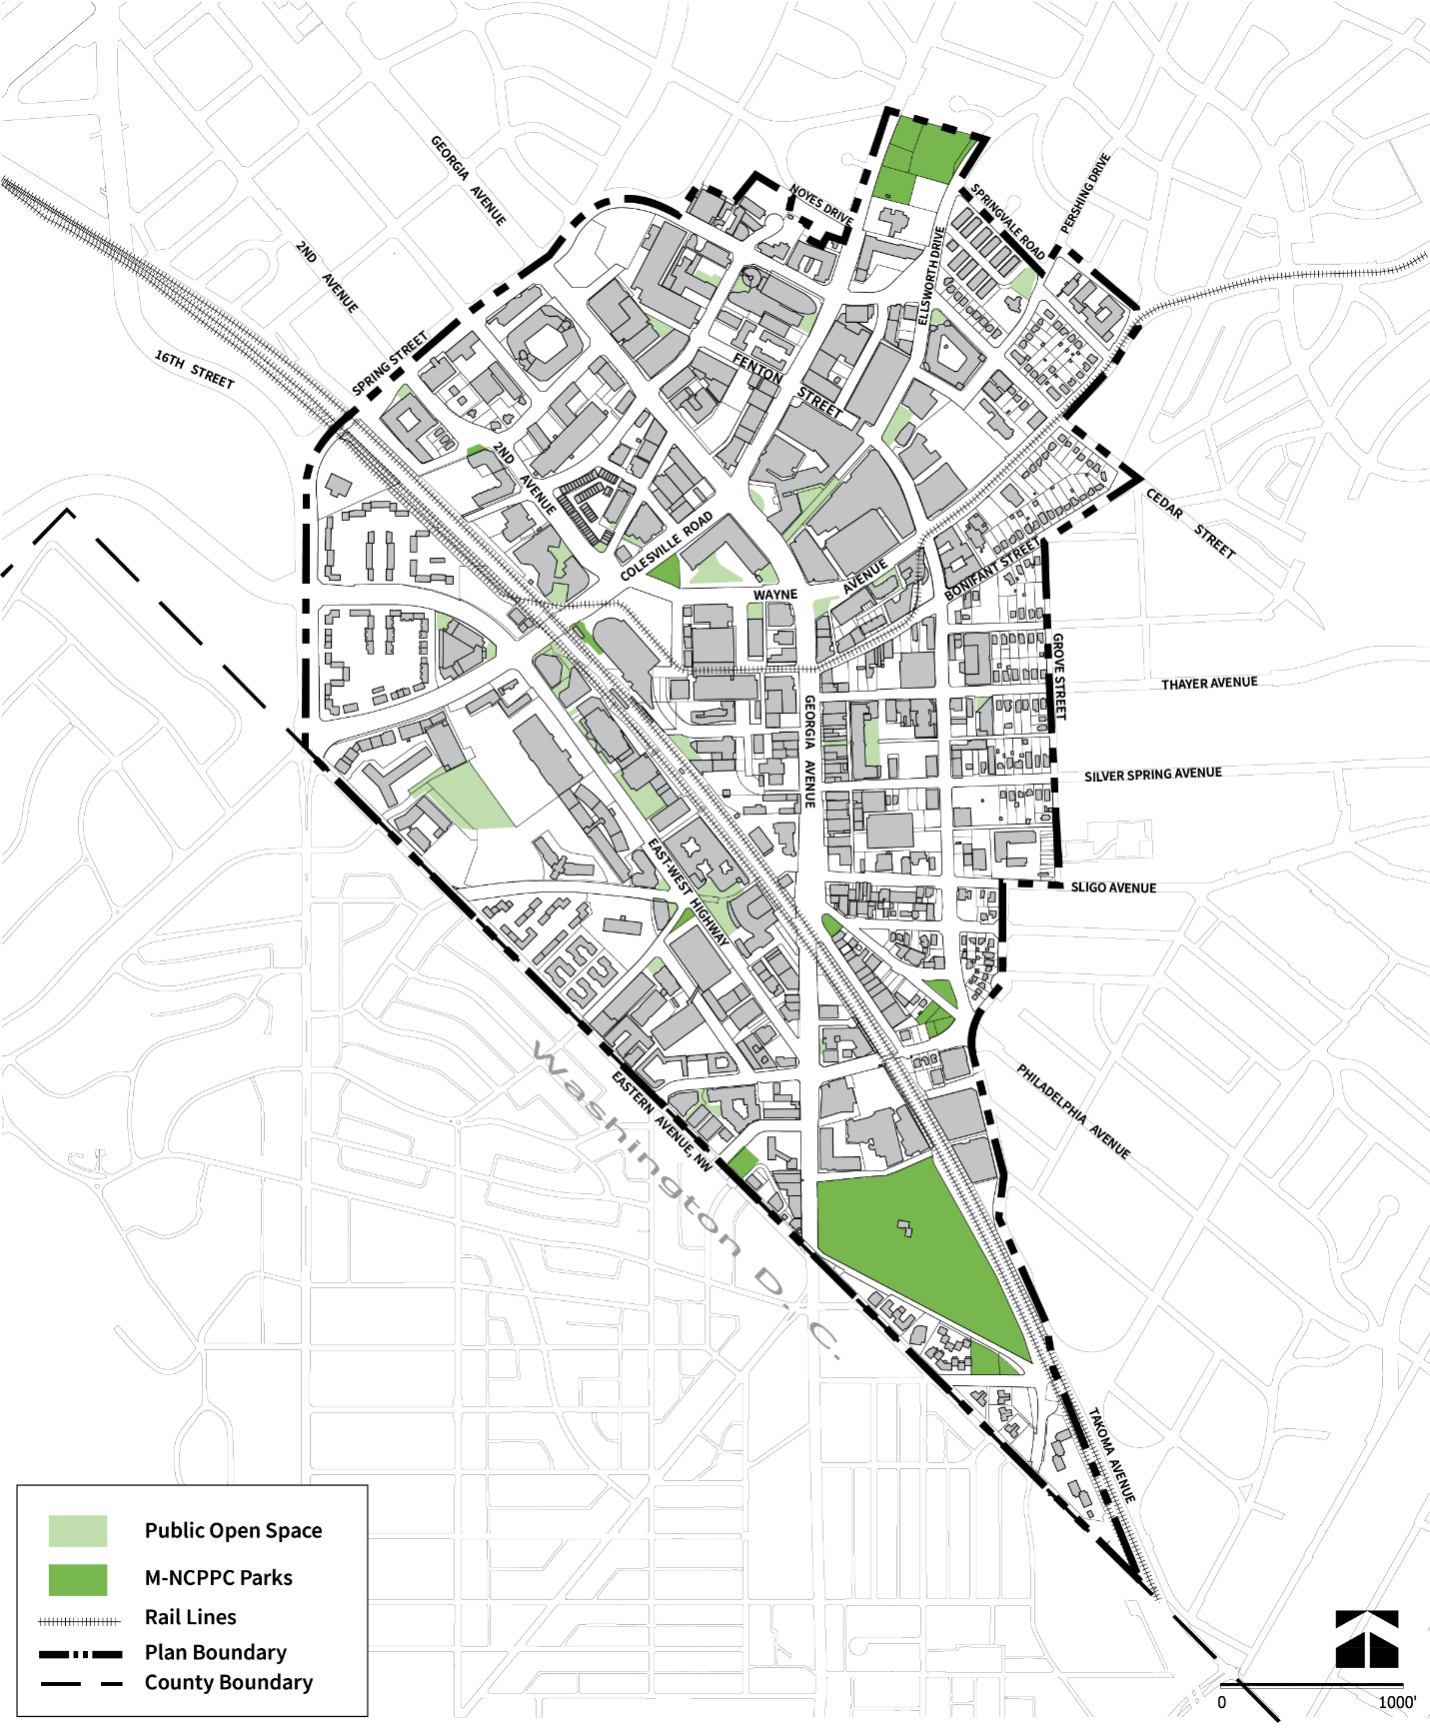 The Plan Area covers approximately 442 acres and is generally bound by Eastern Avenue to the south, 16th Street to the west, Spring Street to the north, and portions of the Seven Oaks-Evanswood and East Silver Spring neighborhoods to the east.